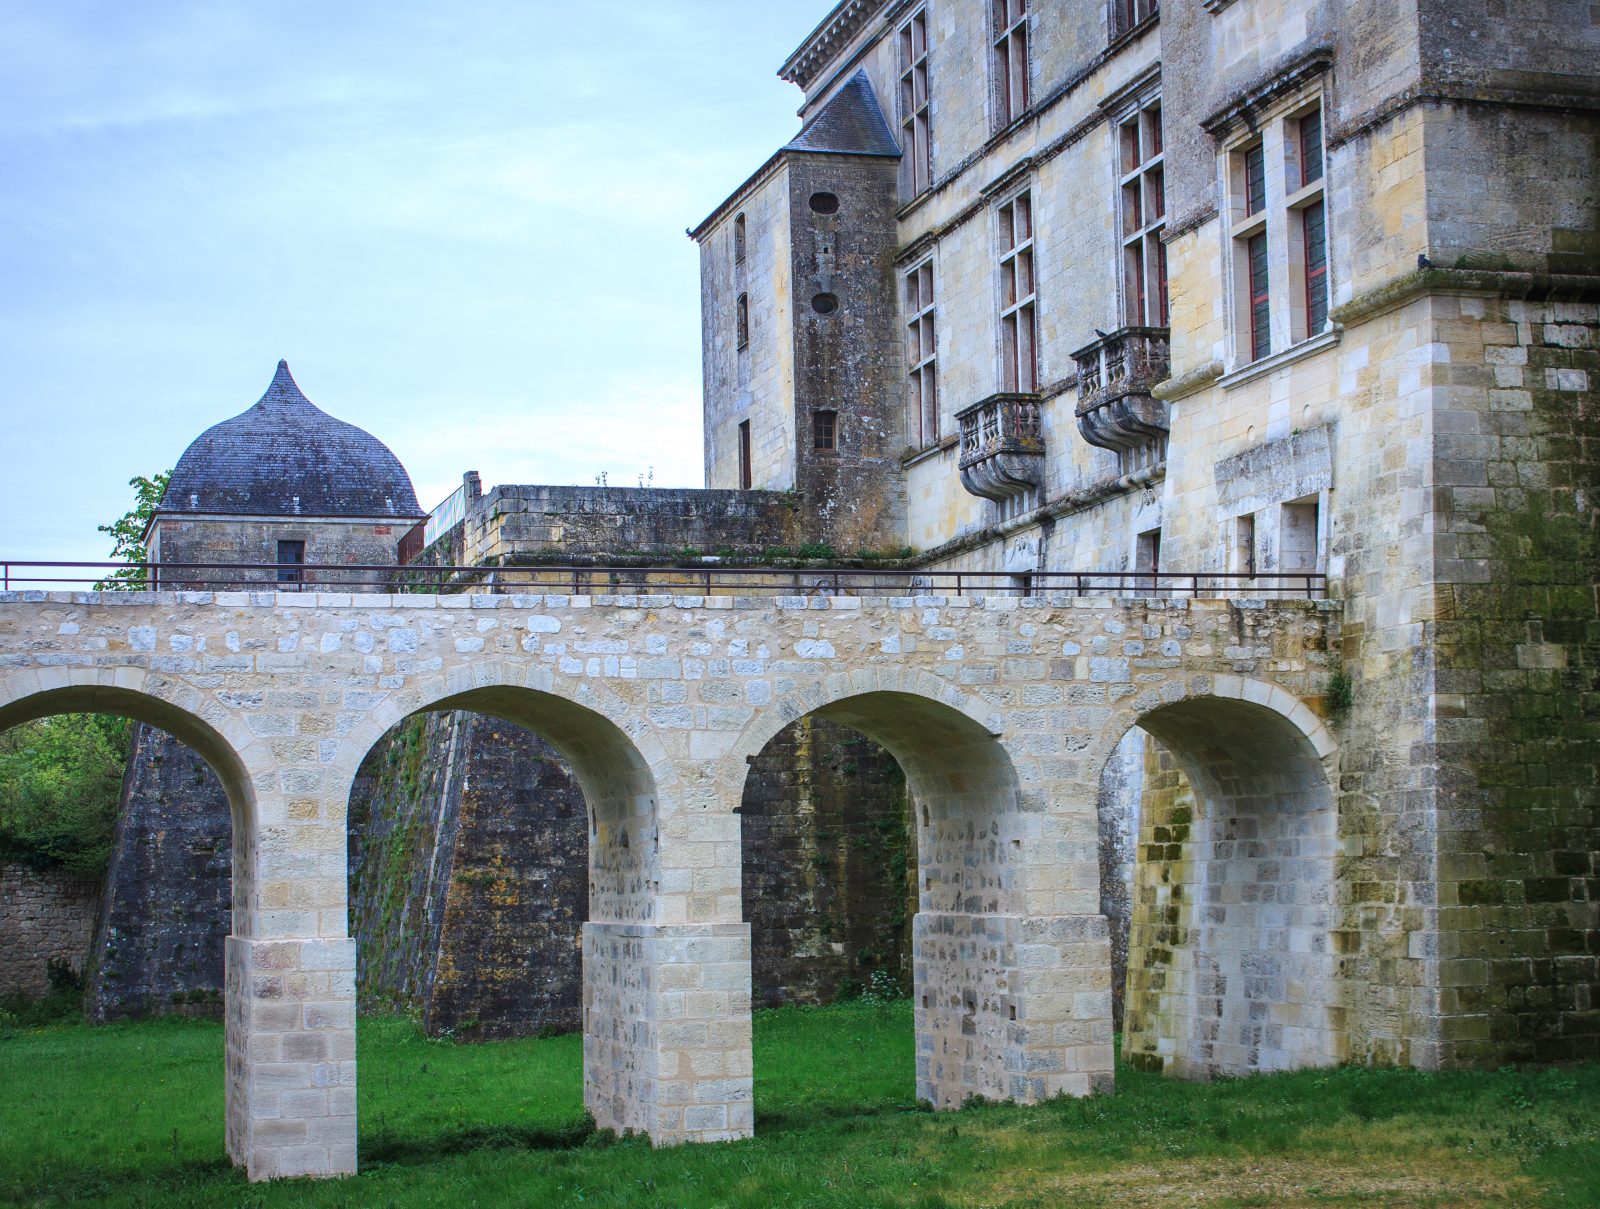 Iconic by bike: the ducal castle of Cadillac-sur-Garonne